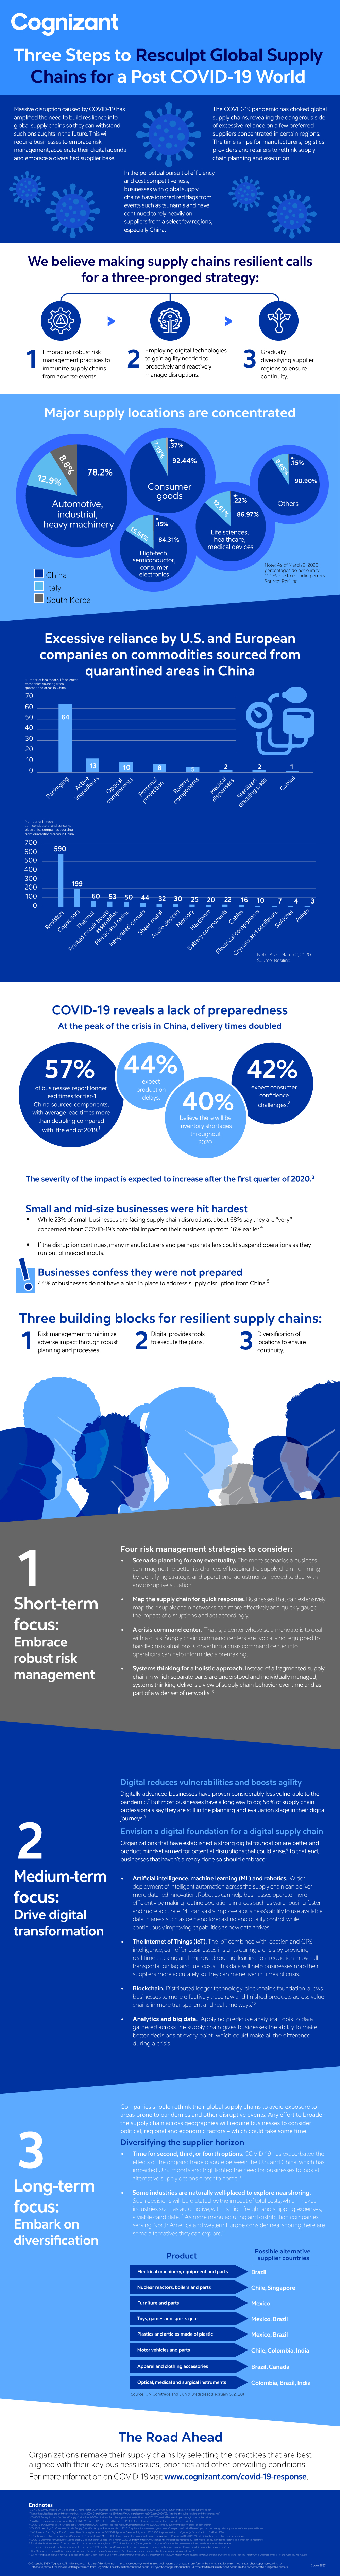 A Way Forward for Building Resilient Supply Chains infographic